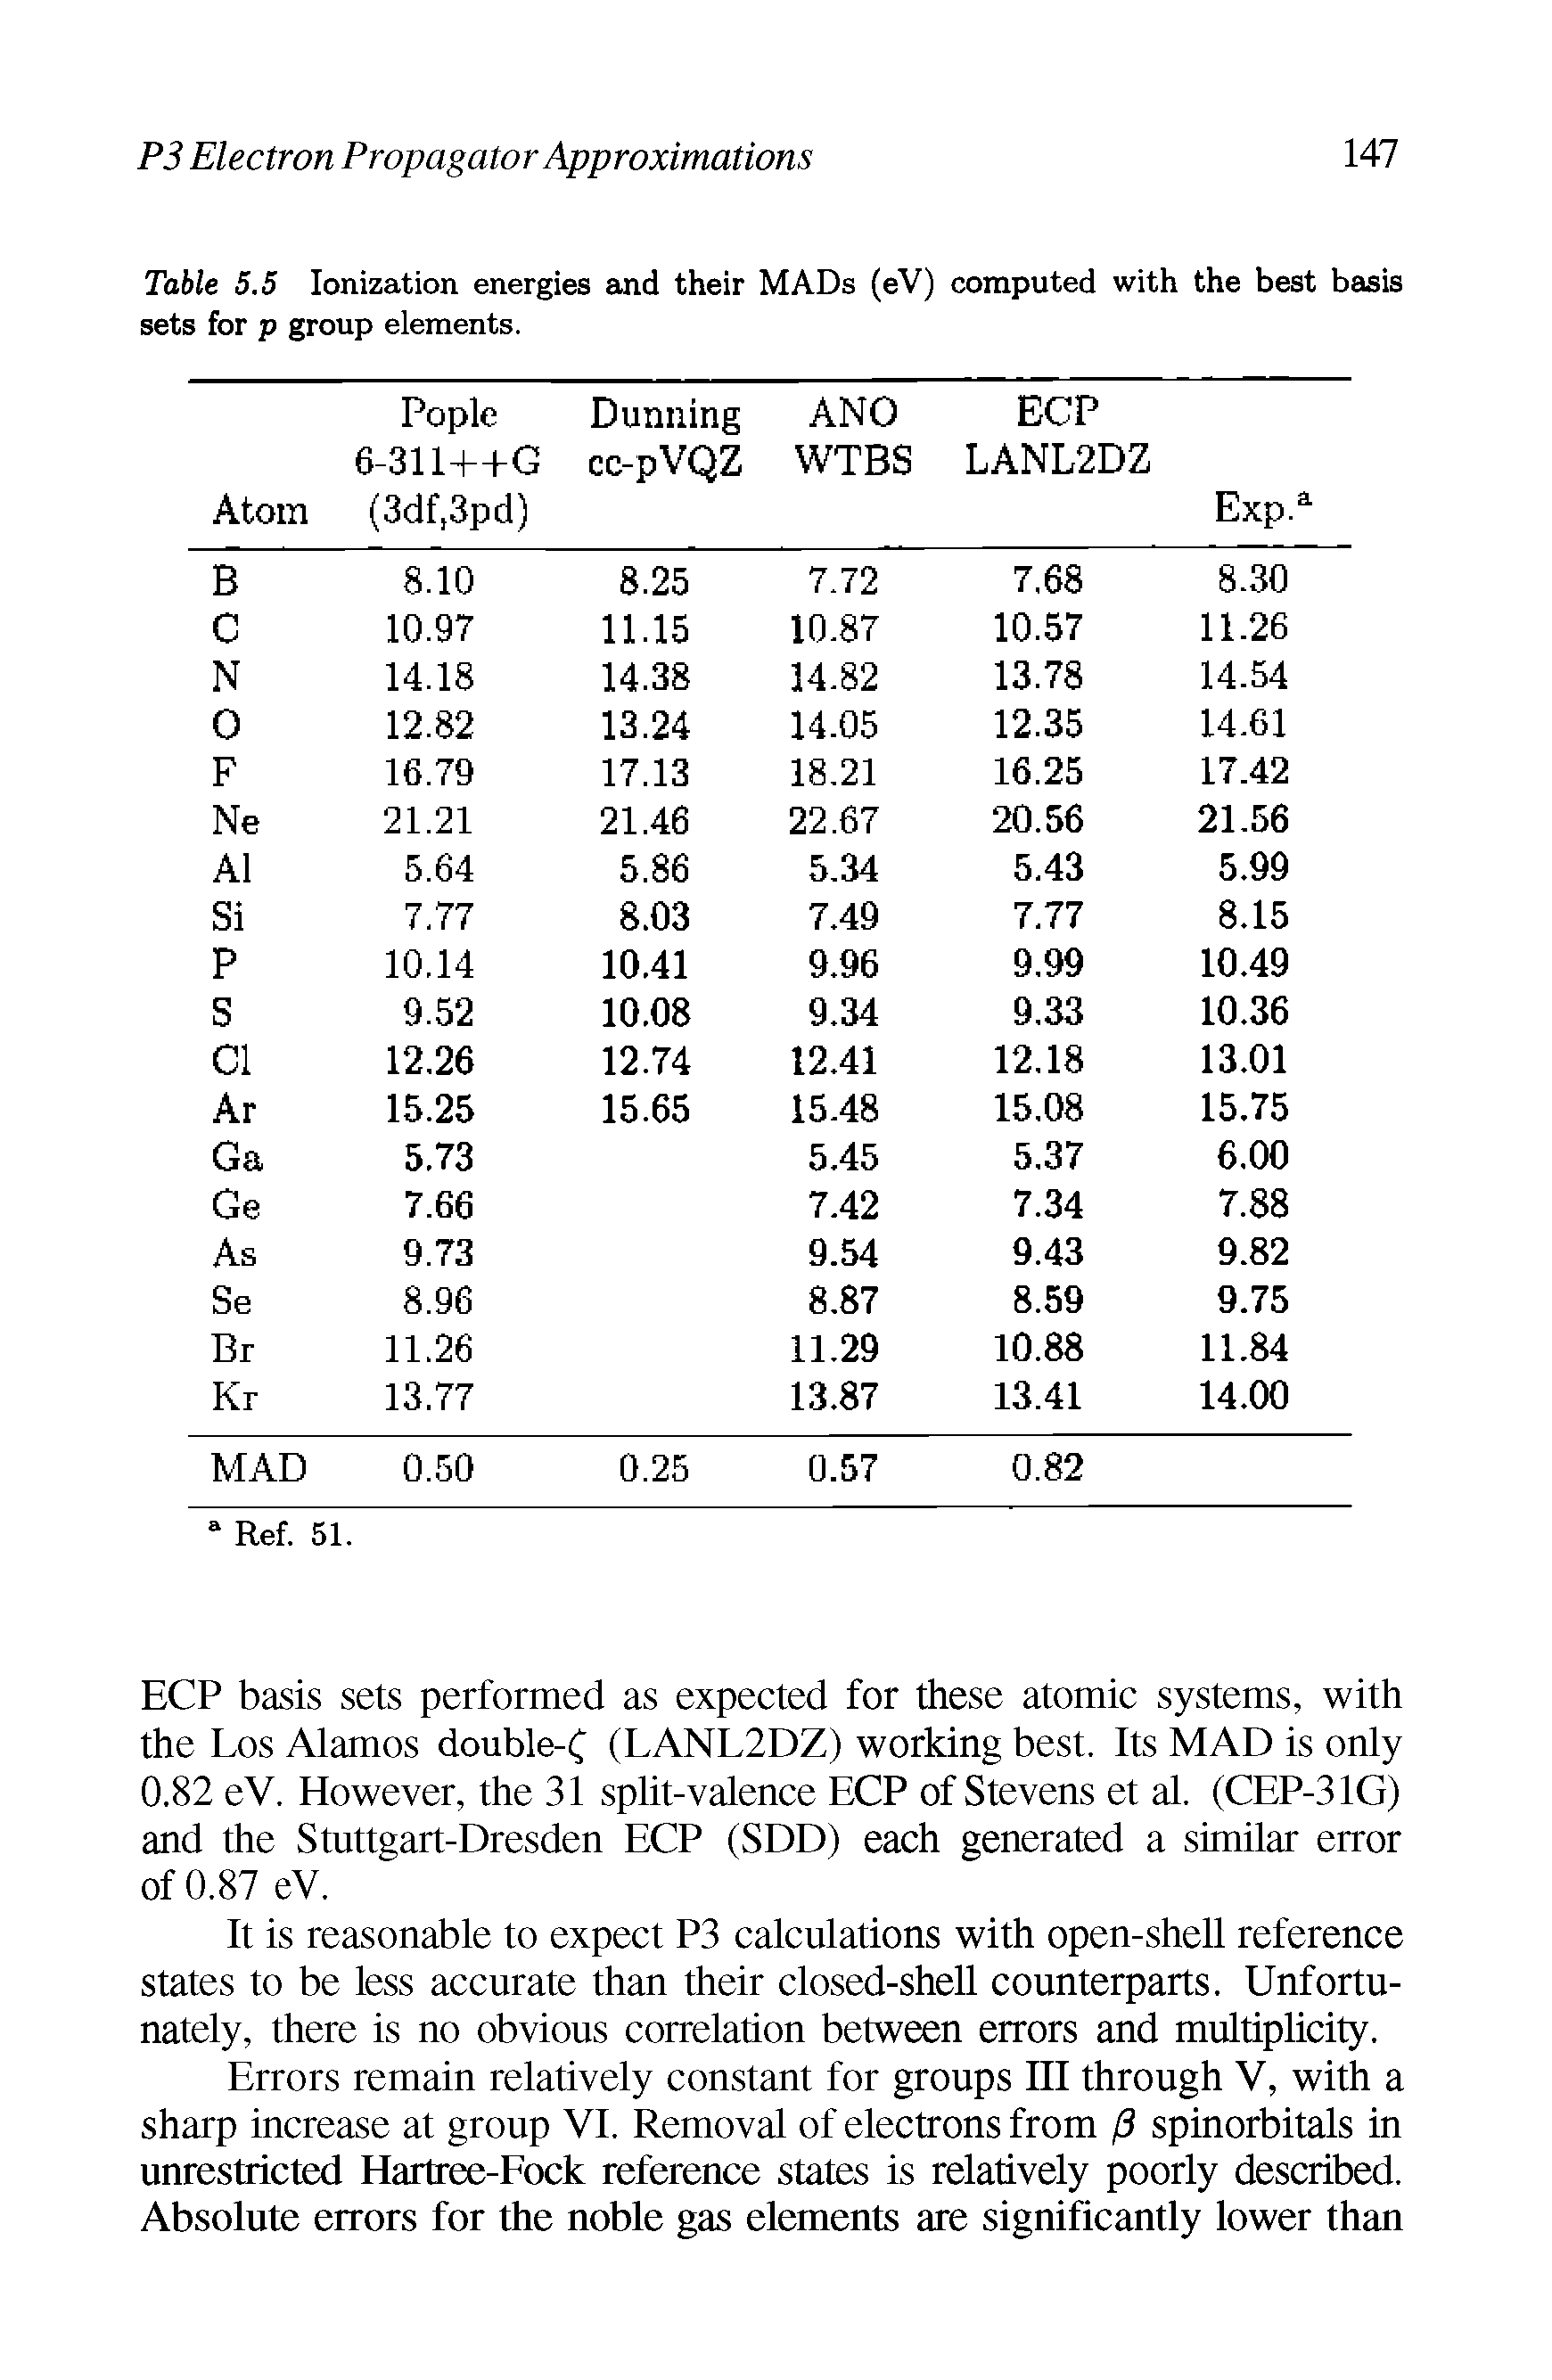 Table 5.5 Ionization energies and their MADs (eV) computed with the best basis sets for p group elements.